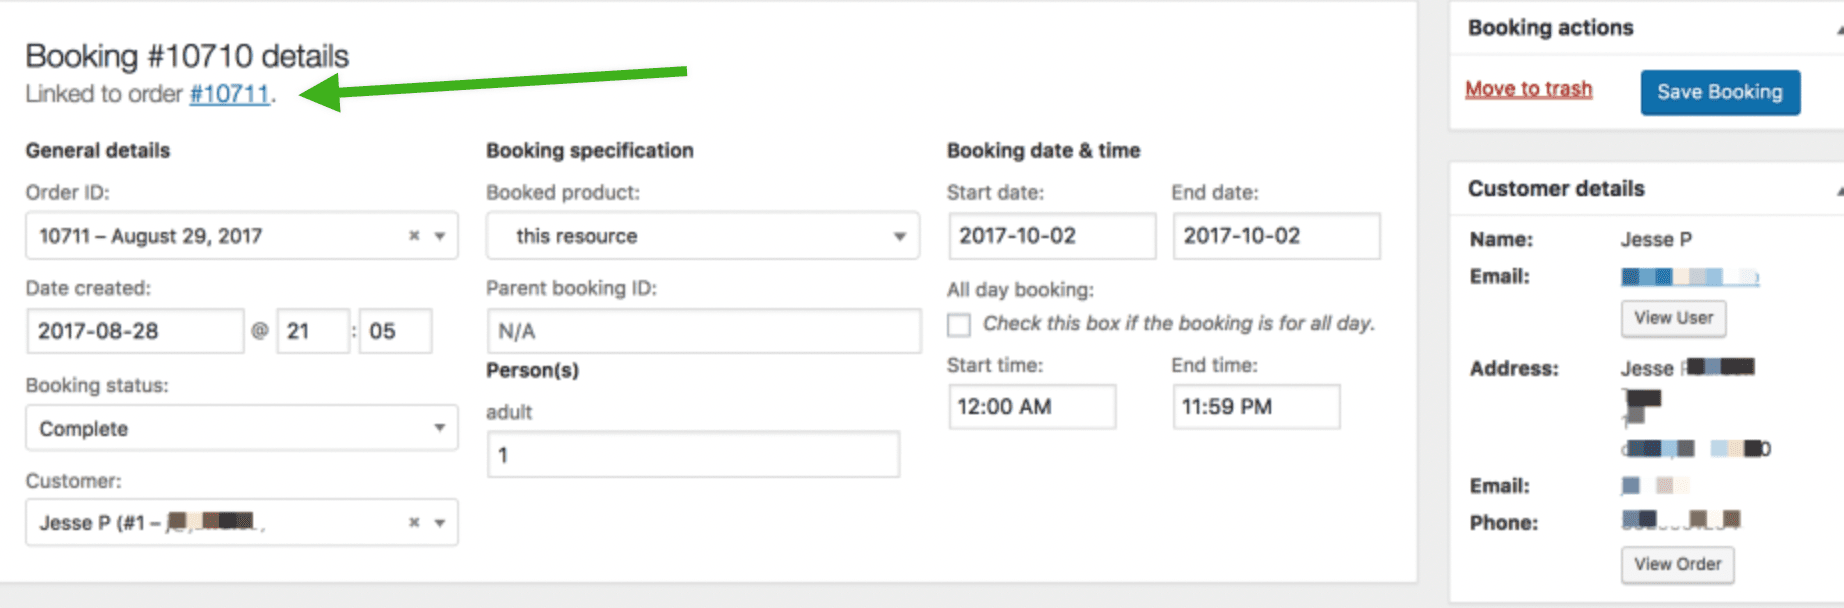 WooCommerce Bookings and WooCommerce Orders Linked on Bookings Details Page